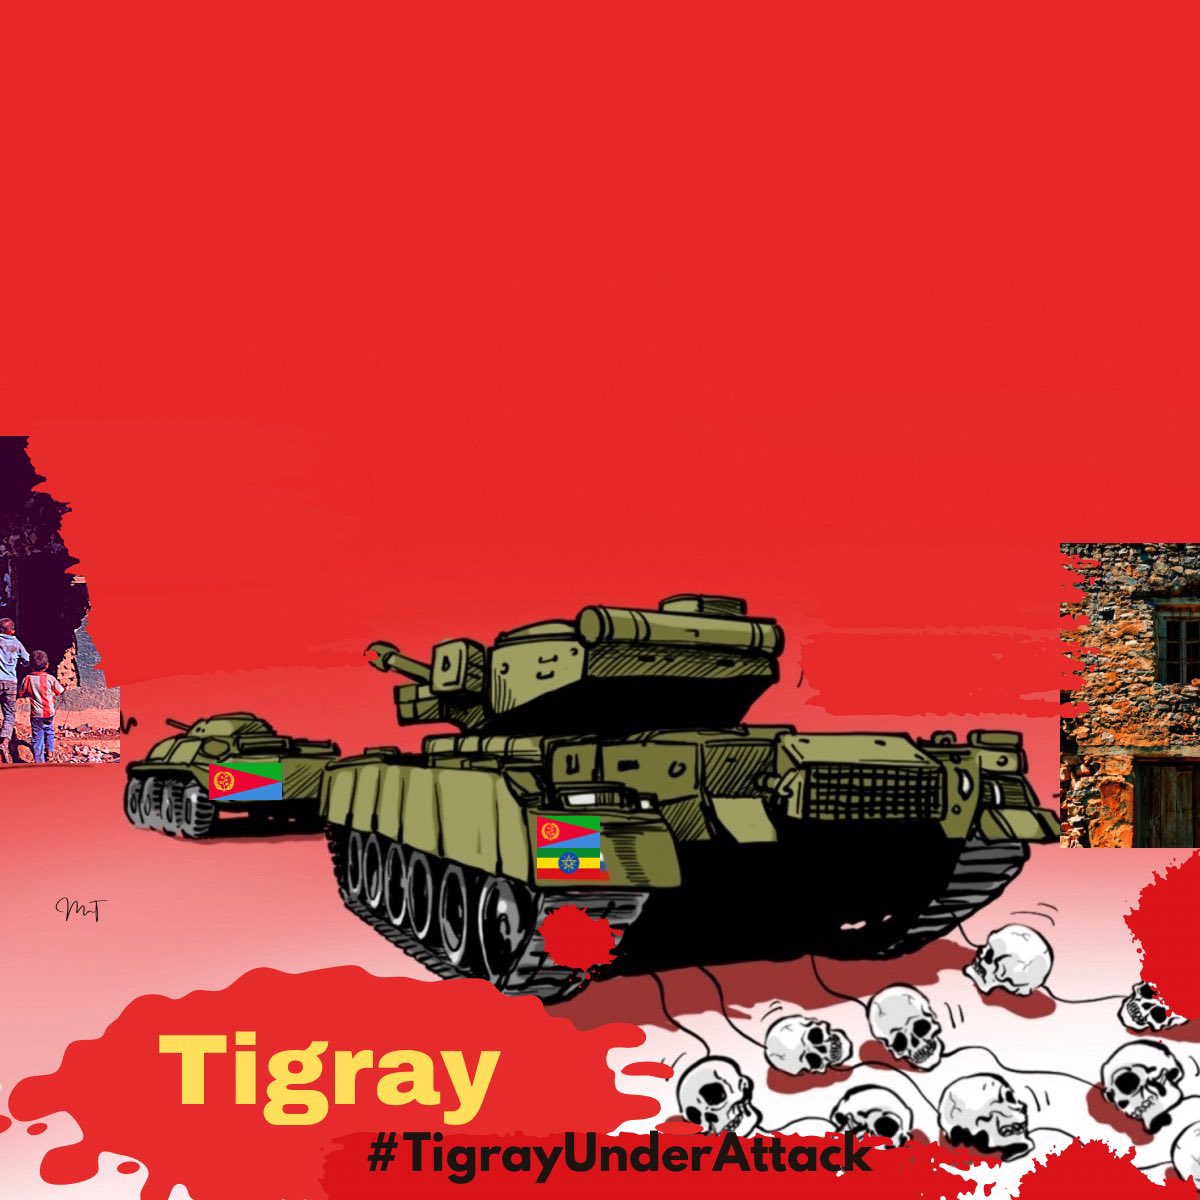 🇪🇷 and Amhara forces are deliberately burning crops and foods.They are also diverting aid to 🇪🇷 and other parts of 🇪🇹 .The EU must ensure  withdraw of 🇪🇷 @UNGeneva  @Haavisto @UN @POTUS @SecBlinken #EritreaOutOfTigray #StopWarOnTigray @Europarl_EN @Kingthe_12